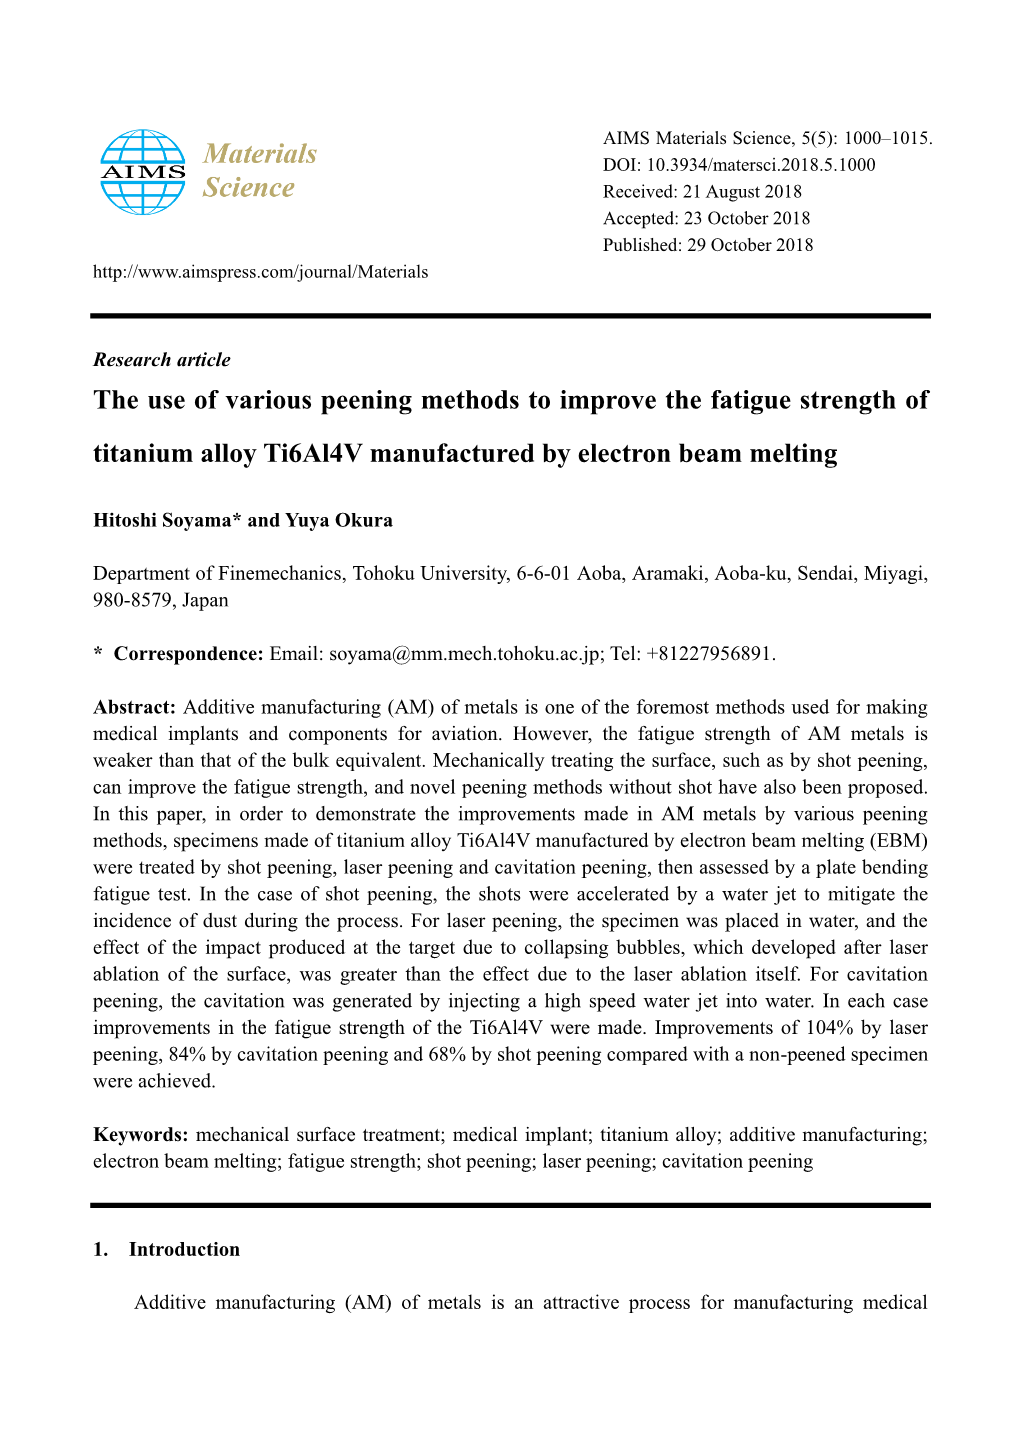 The Use of Various Peening Methods to Improve the Fatigue Strength of Titanium Alloy Ti6al4v Manufactured by Electron Beam Melting